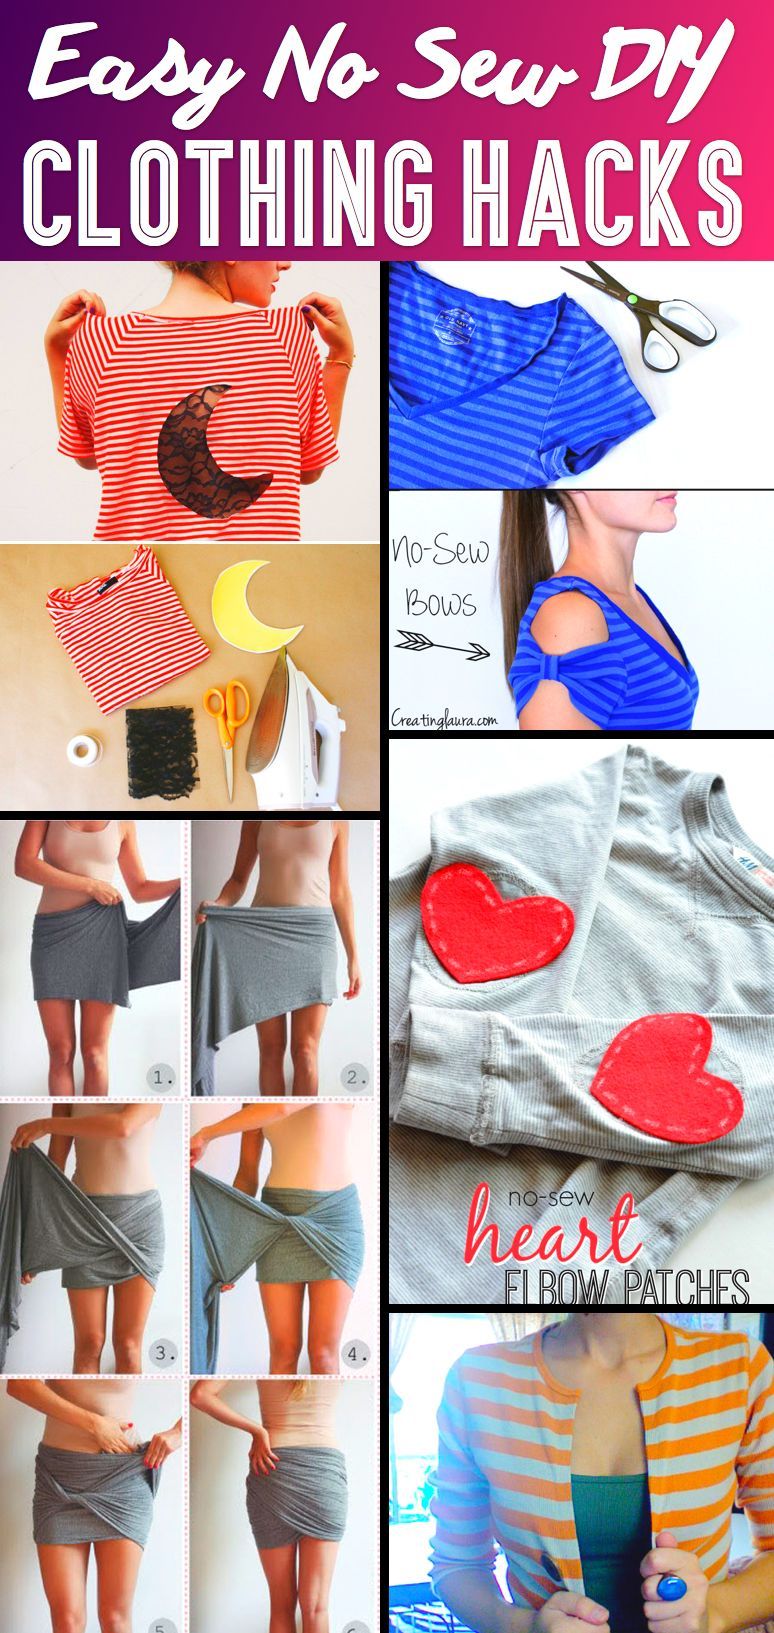 37 Truly Easy No Sew DIY Clothing Hacks -   24 diy projects clothes
 ideas